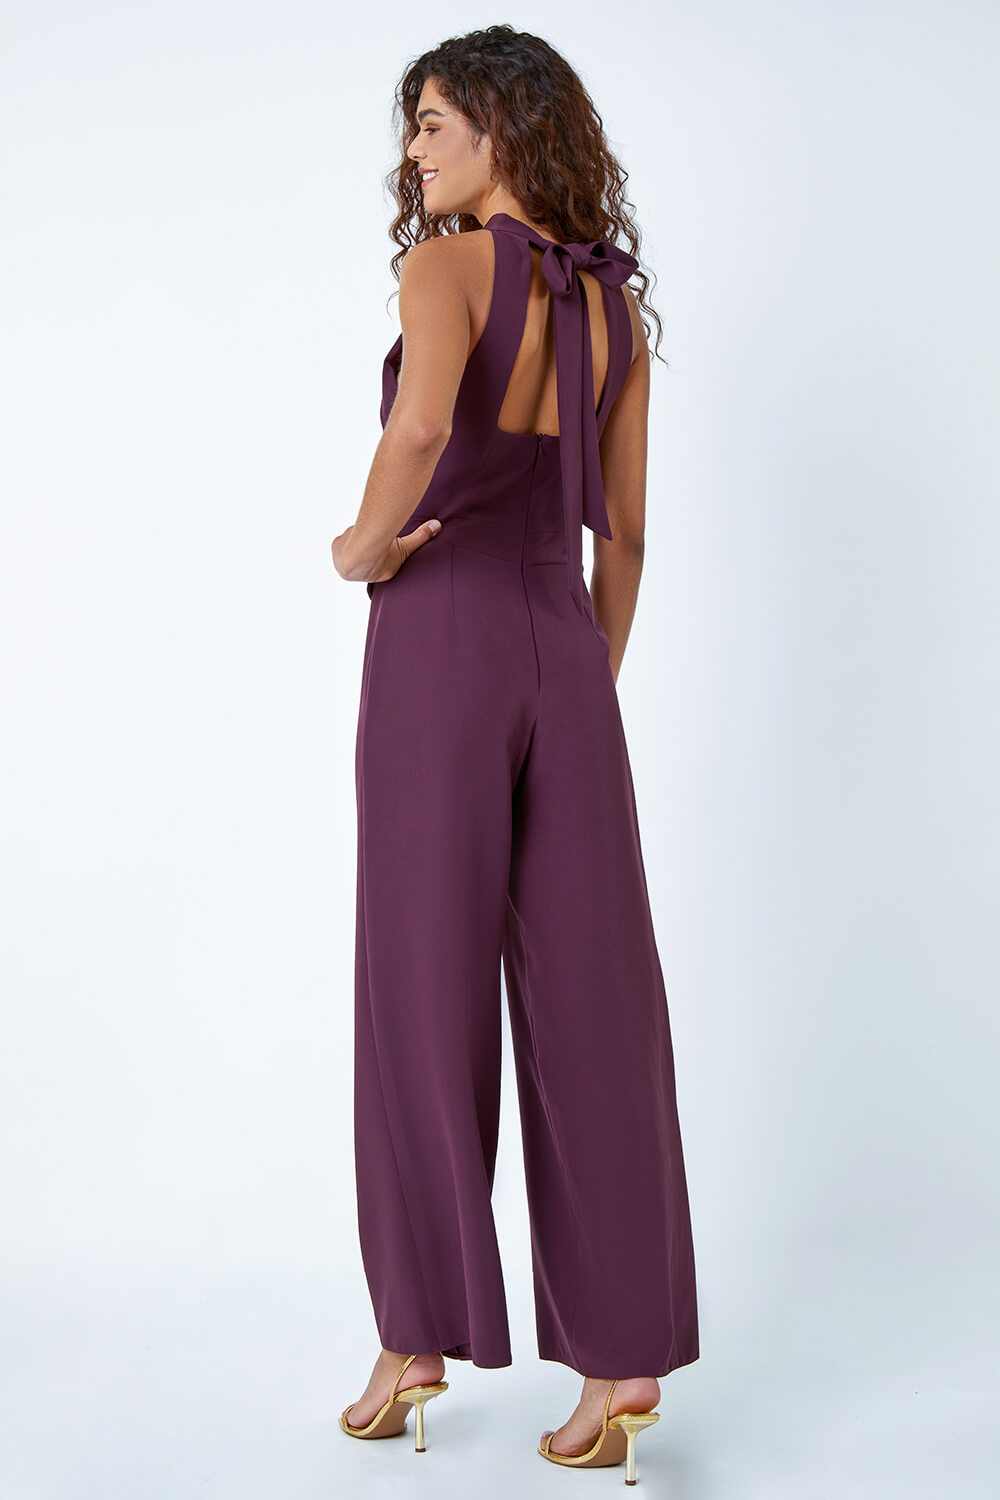 Wine Pleated Halter Neck Wide Leg Stretch Jumpsuit, Image 3 of 5